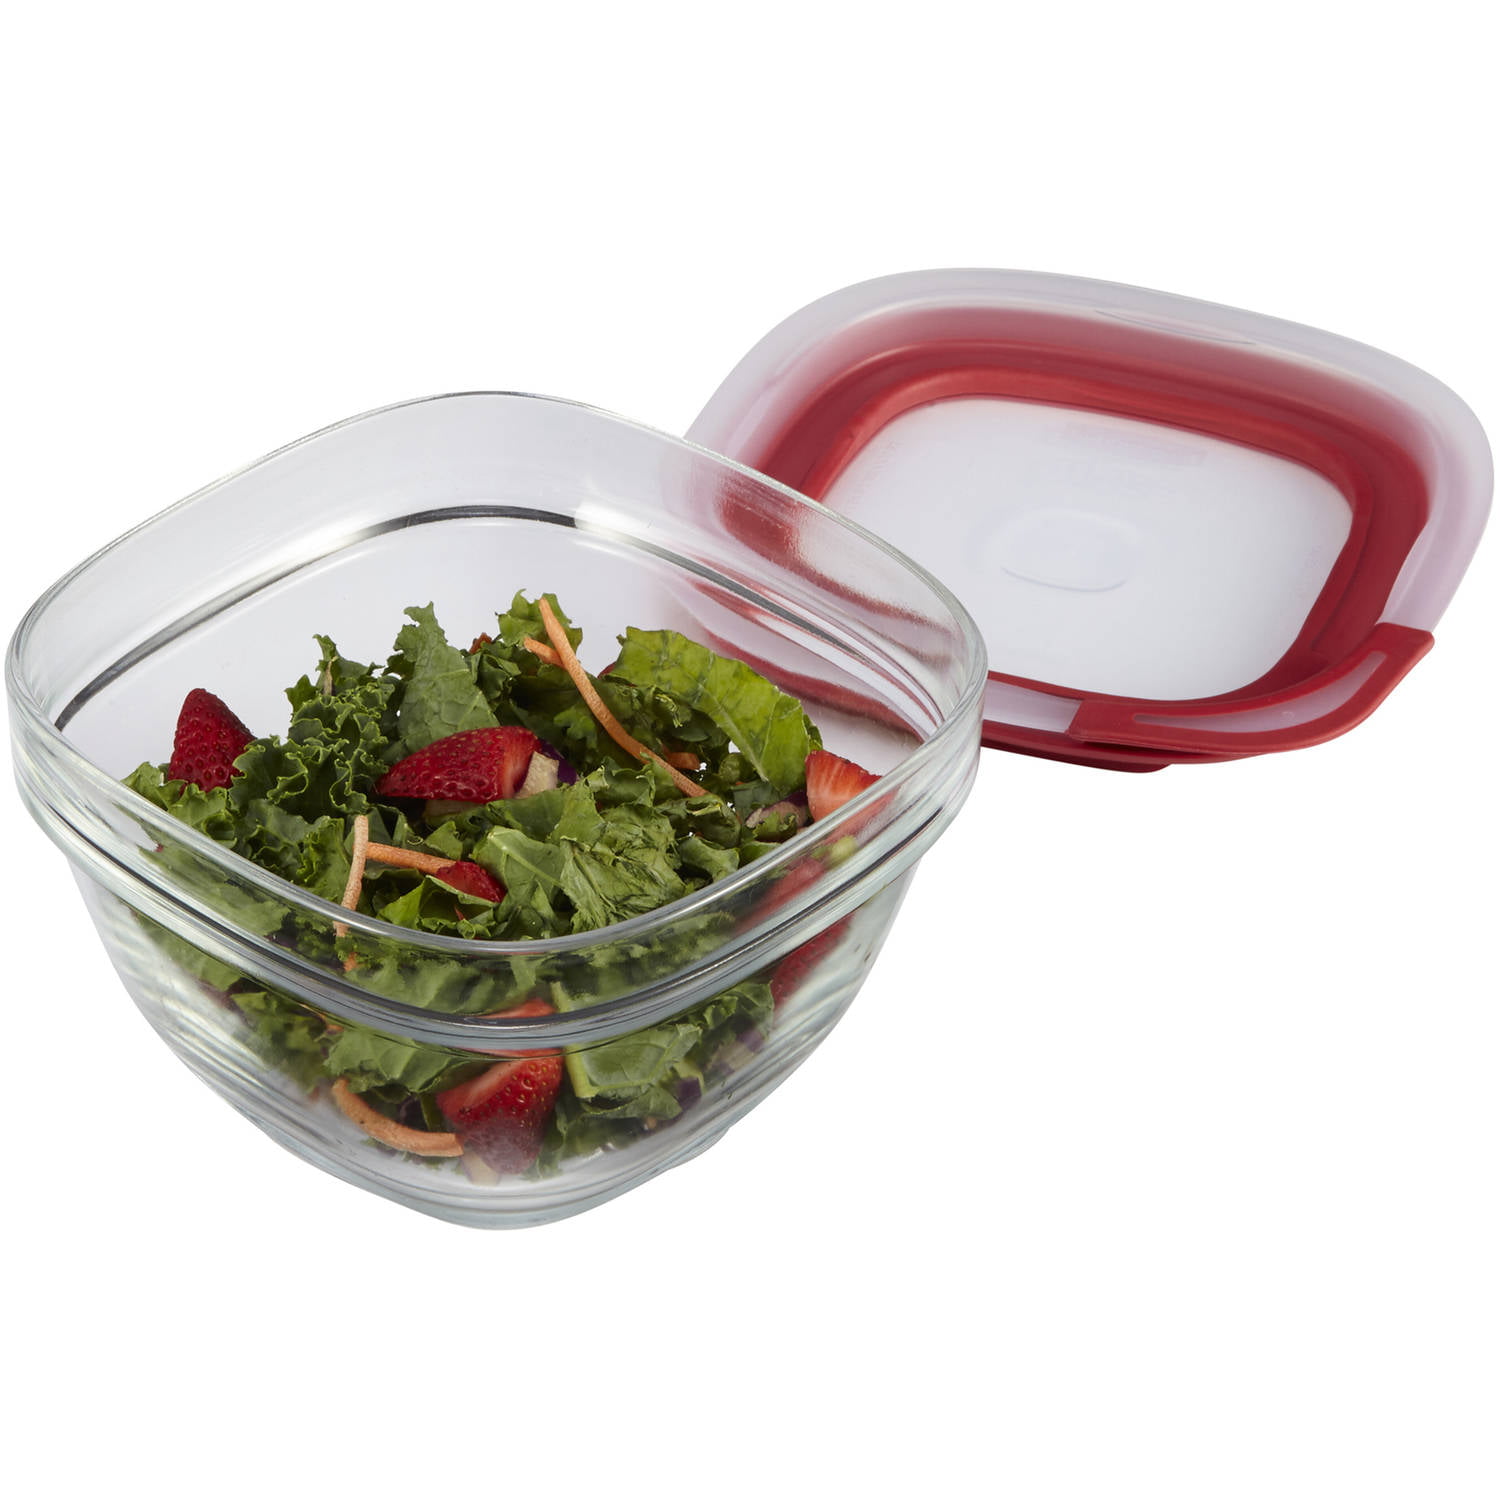 Food storage containers: The best deals on Pyrex, Rubbermaid and